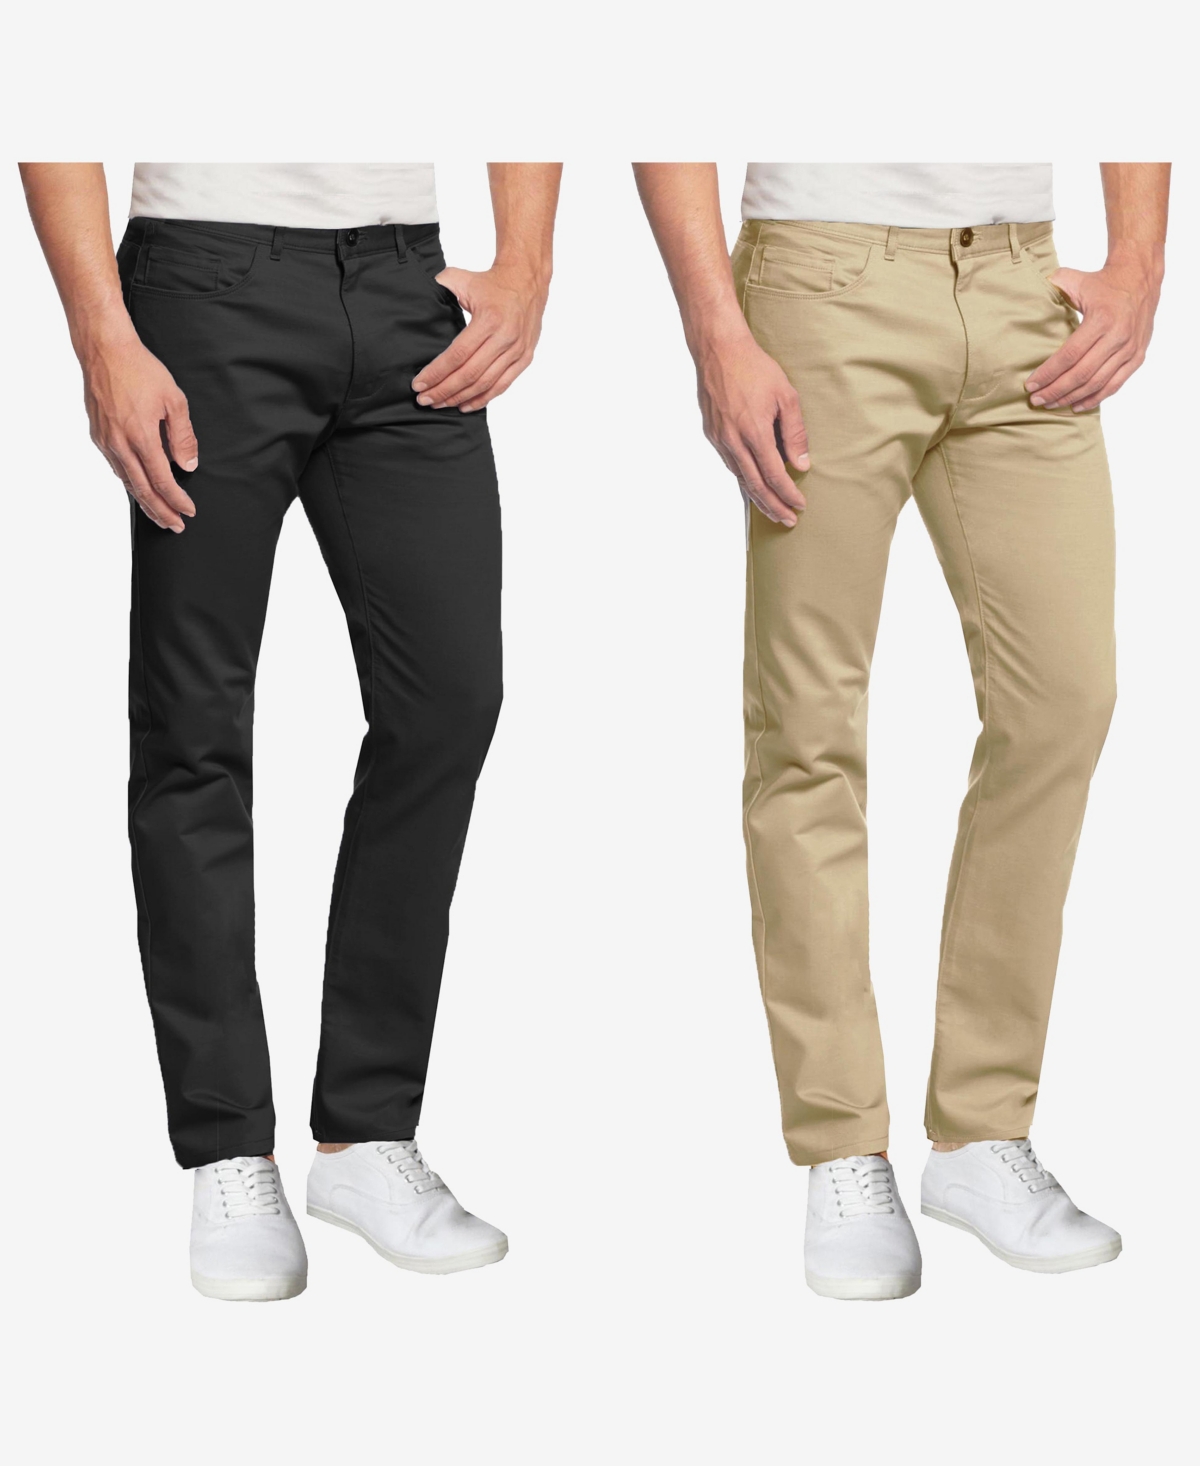 Galaxy By Harvic Men's 5-pocket Ultra-stretch Skinny Fit Chino Pants, Pack Of 2 In Black,khaki